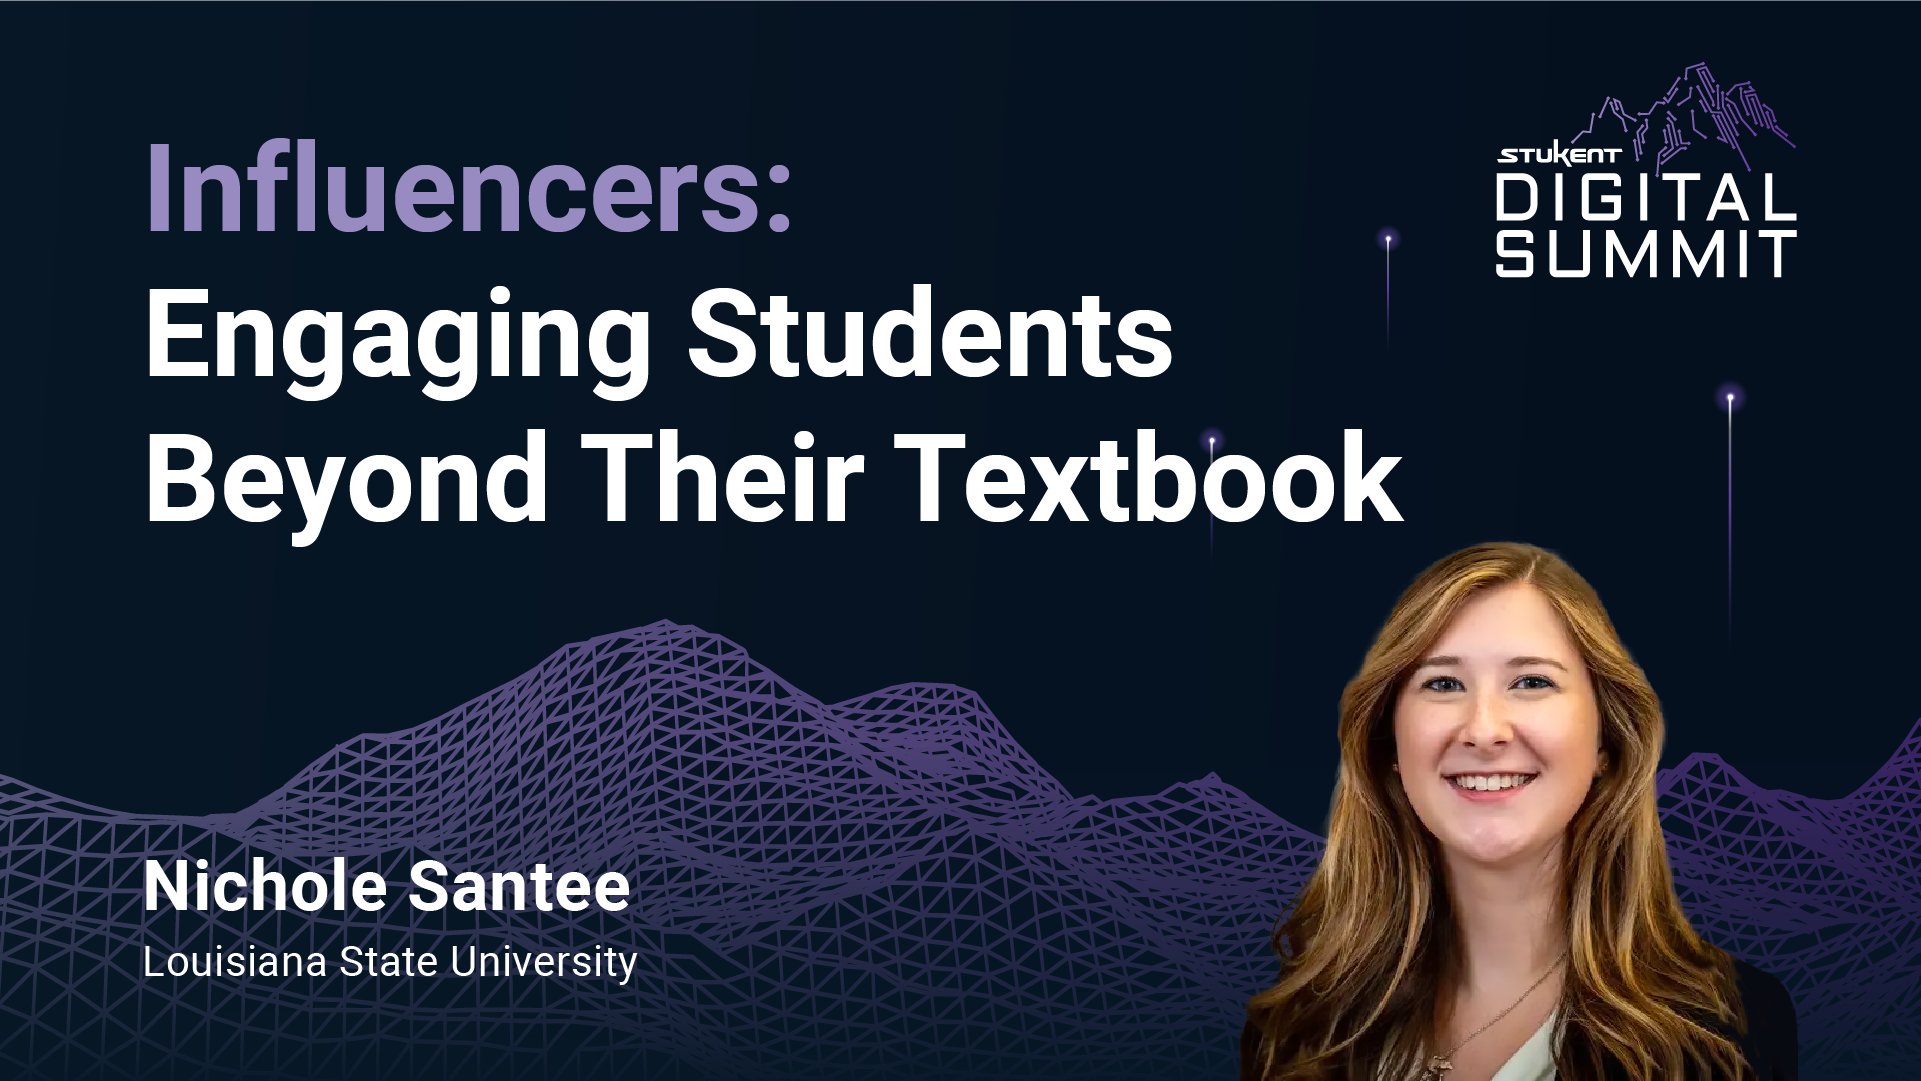 Influencers: Engaging Students Beyond Their Textbook